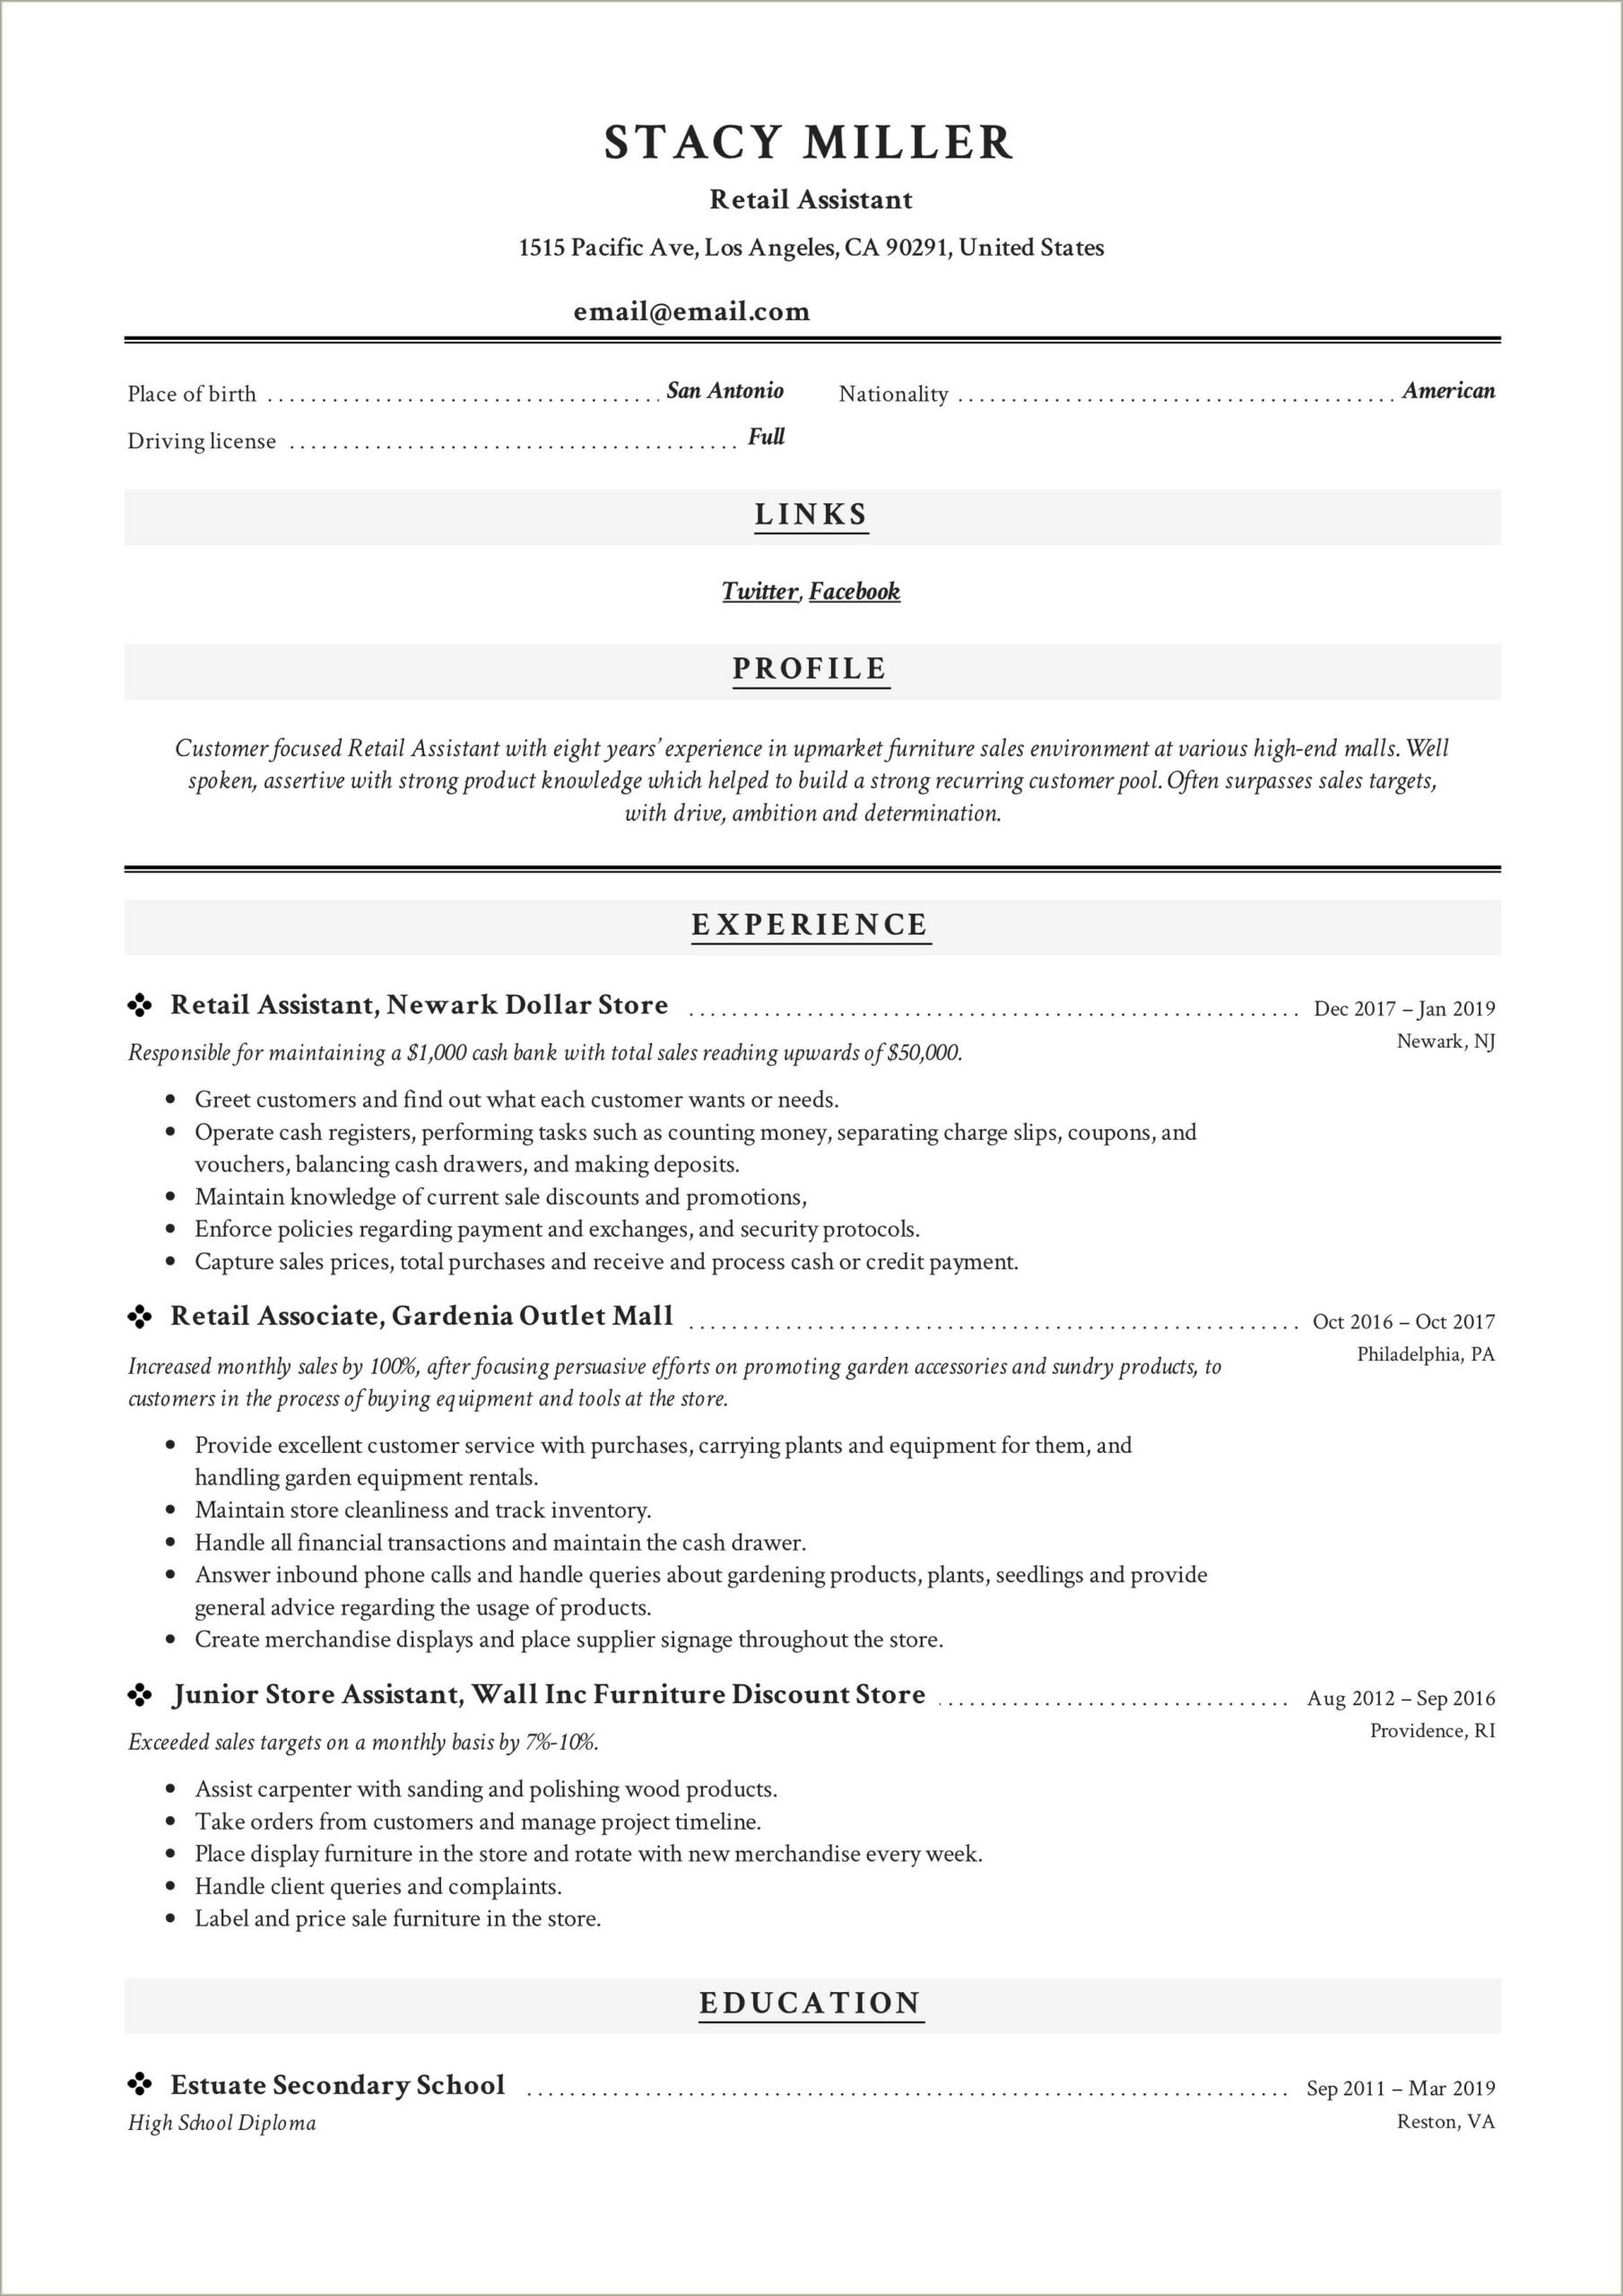 Sap Basis Resume For 7 Years Experience